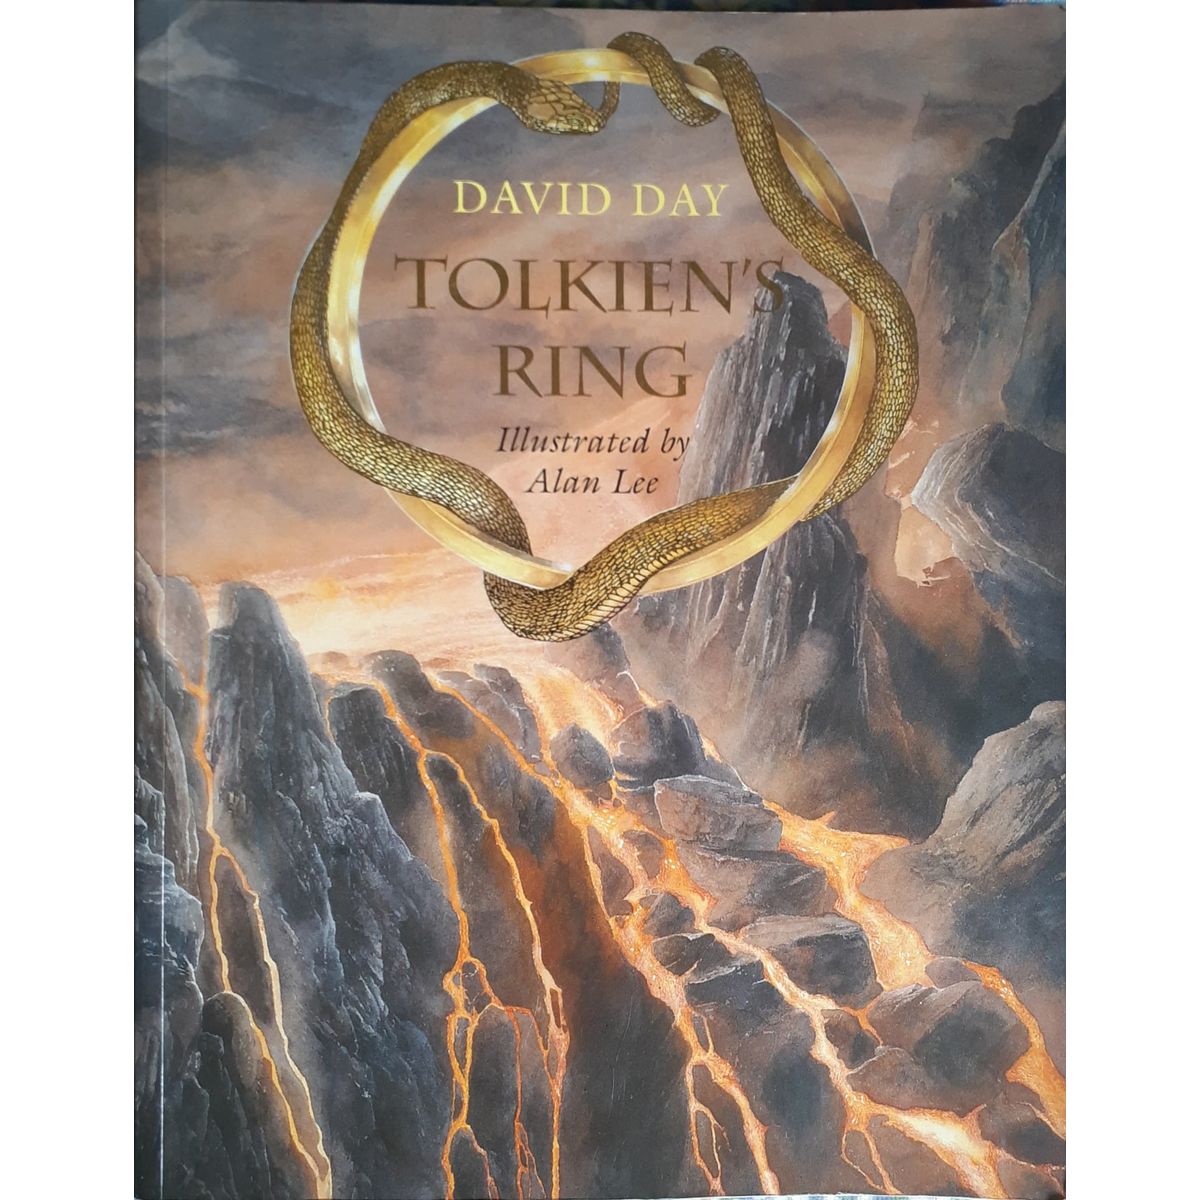 ISBN: 9781862055513 / 1862055513 - Tolkien's Ring by David Day, illustrated by Alan Lee [1999]